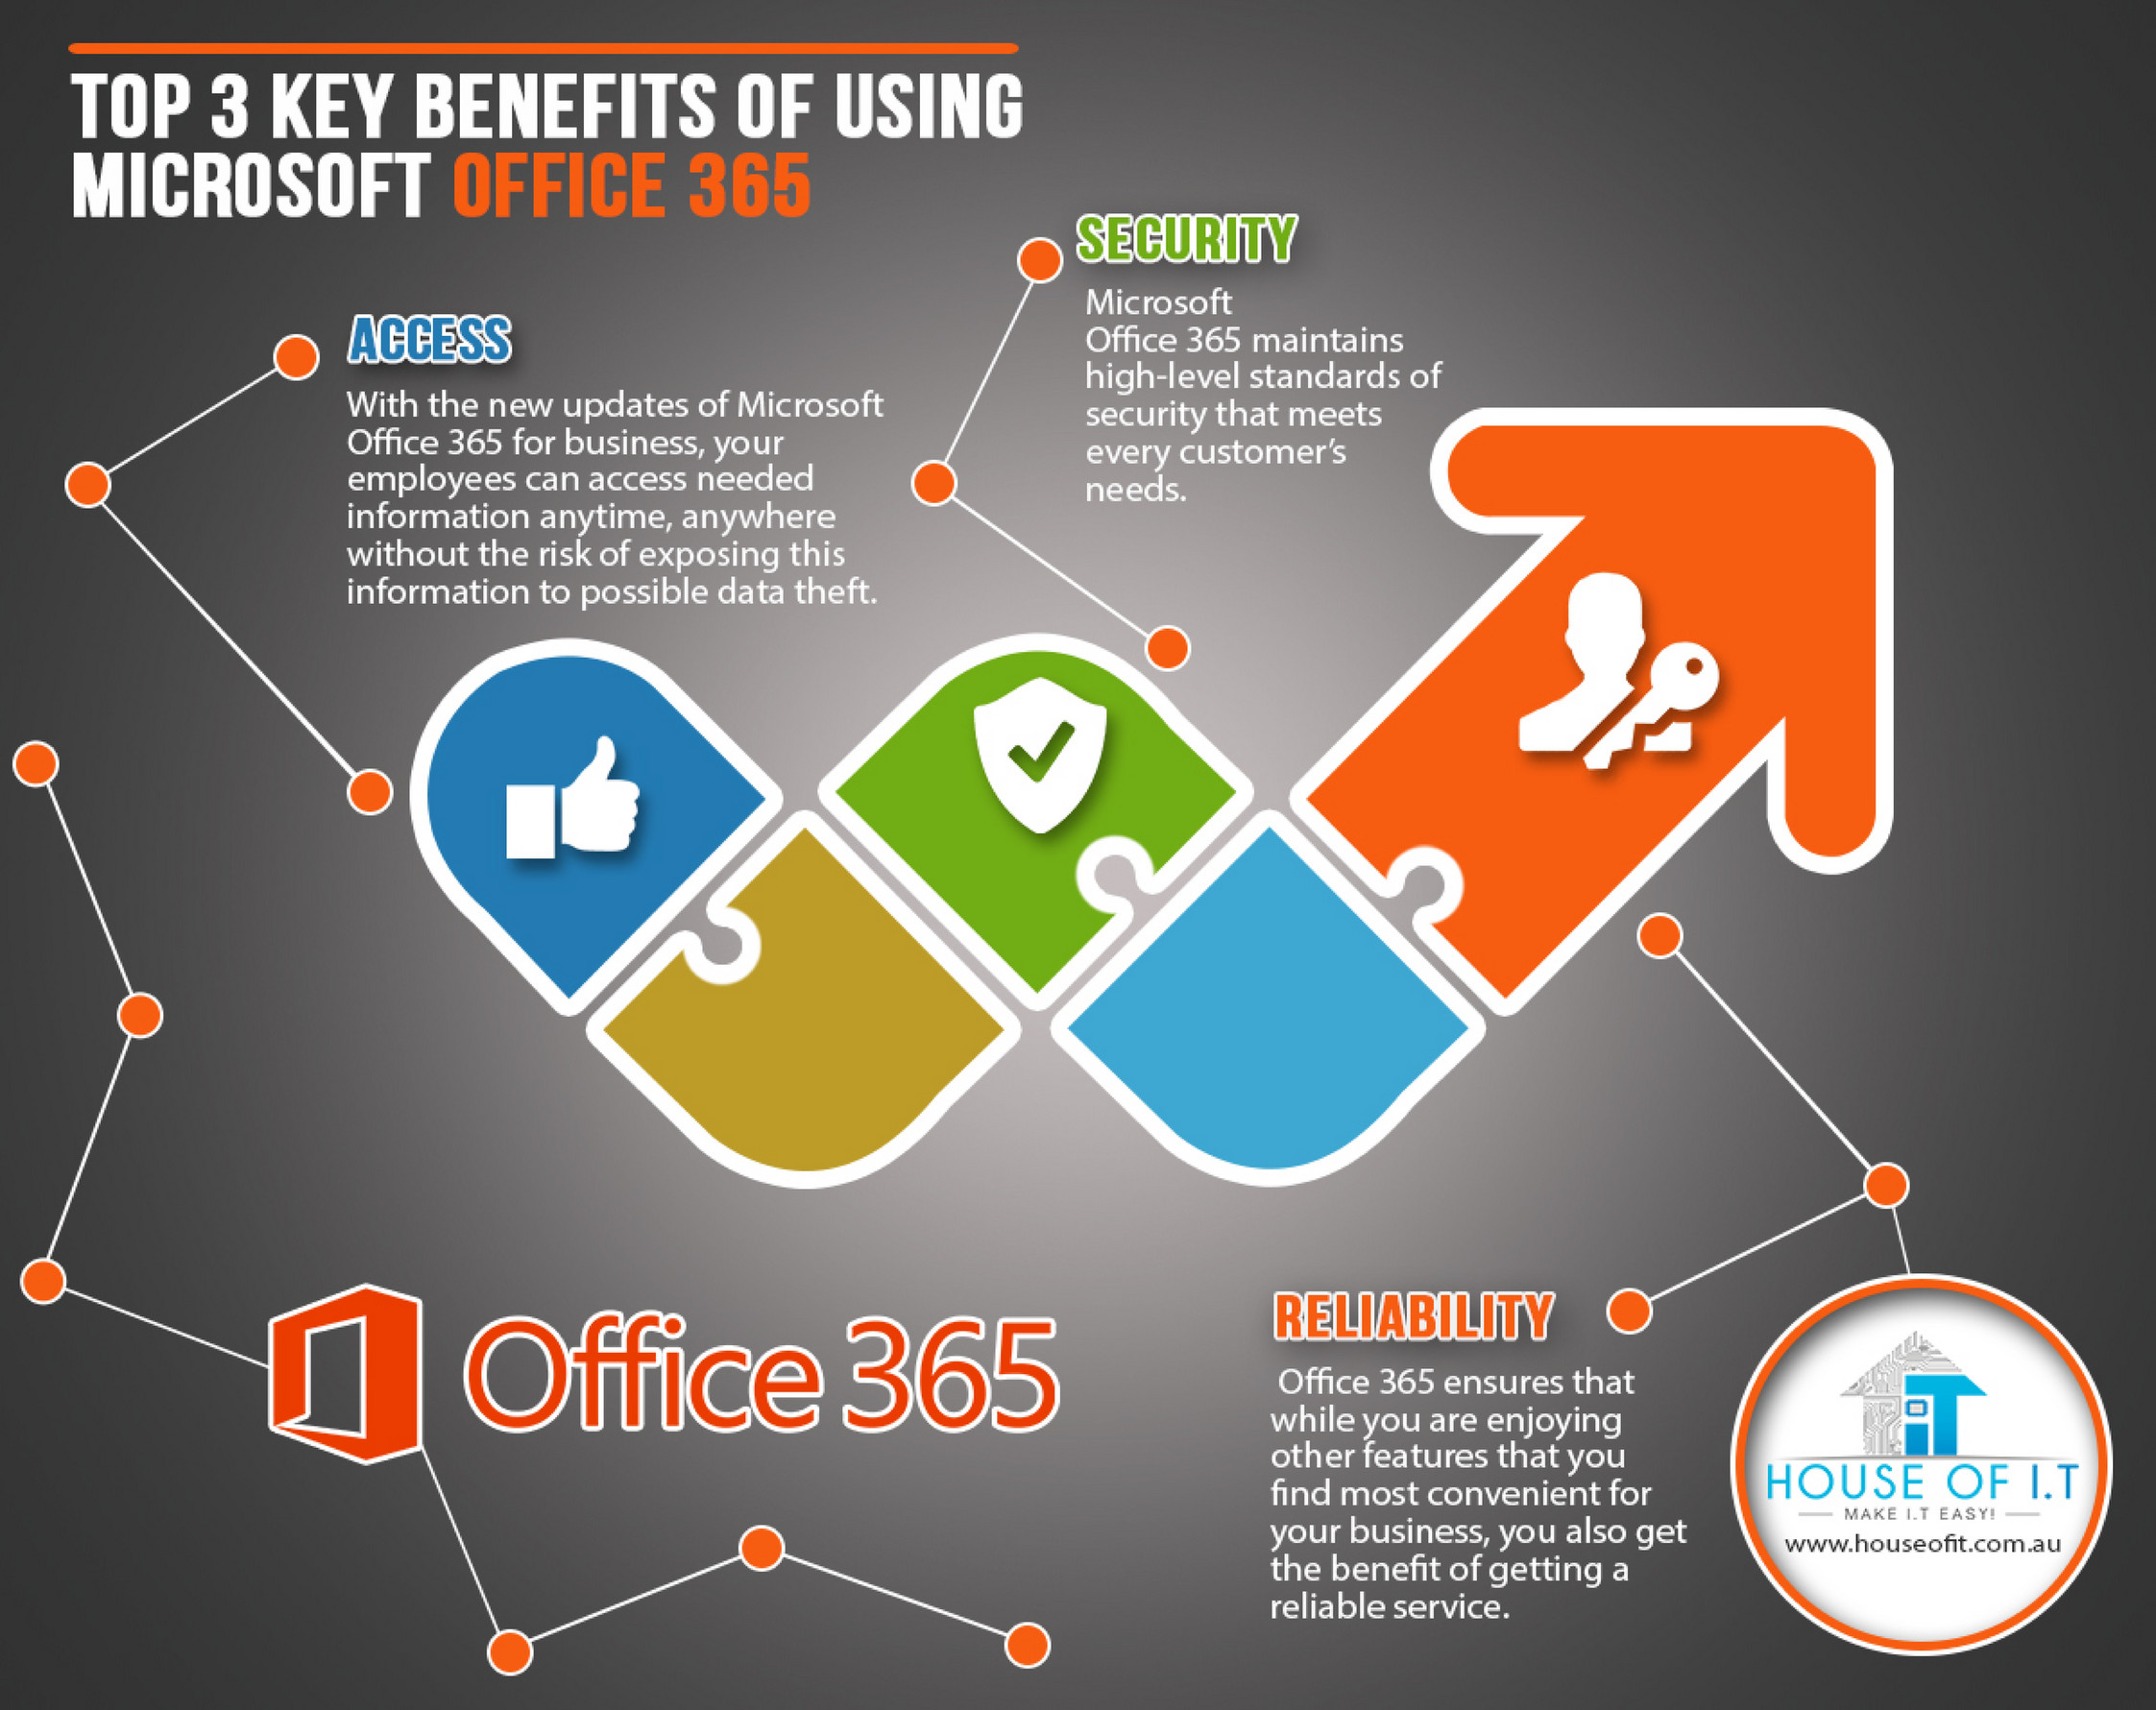 The Benefits of Microsoft Office for Students and Professionals